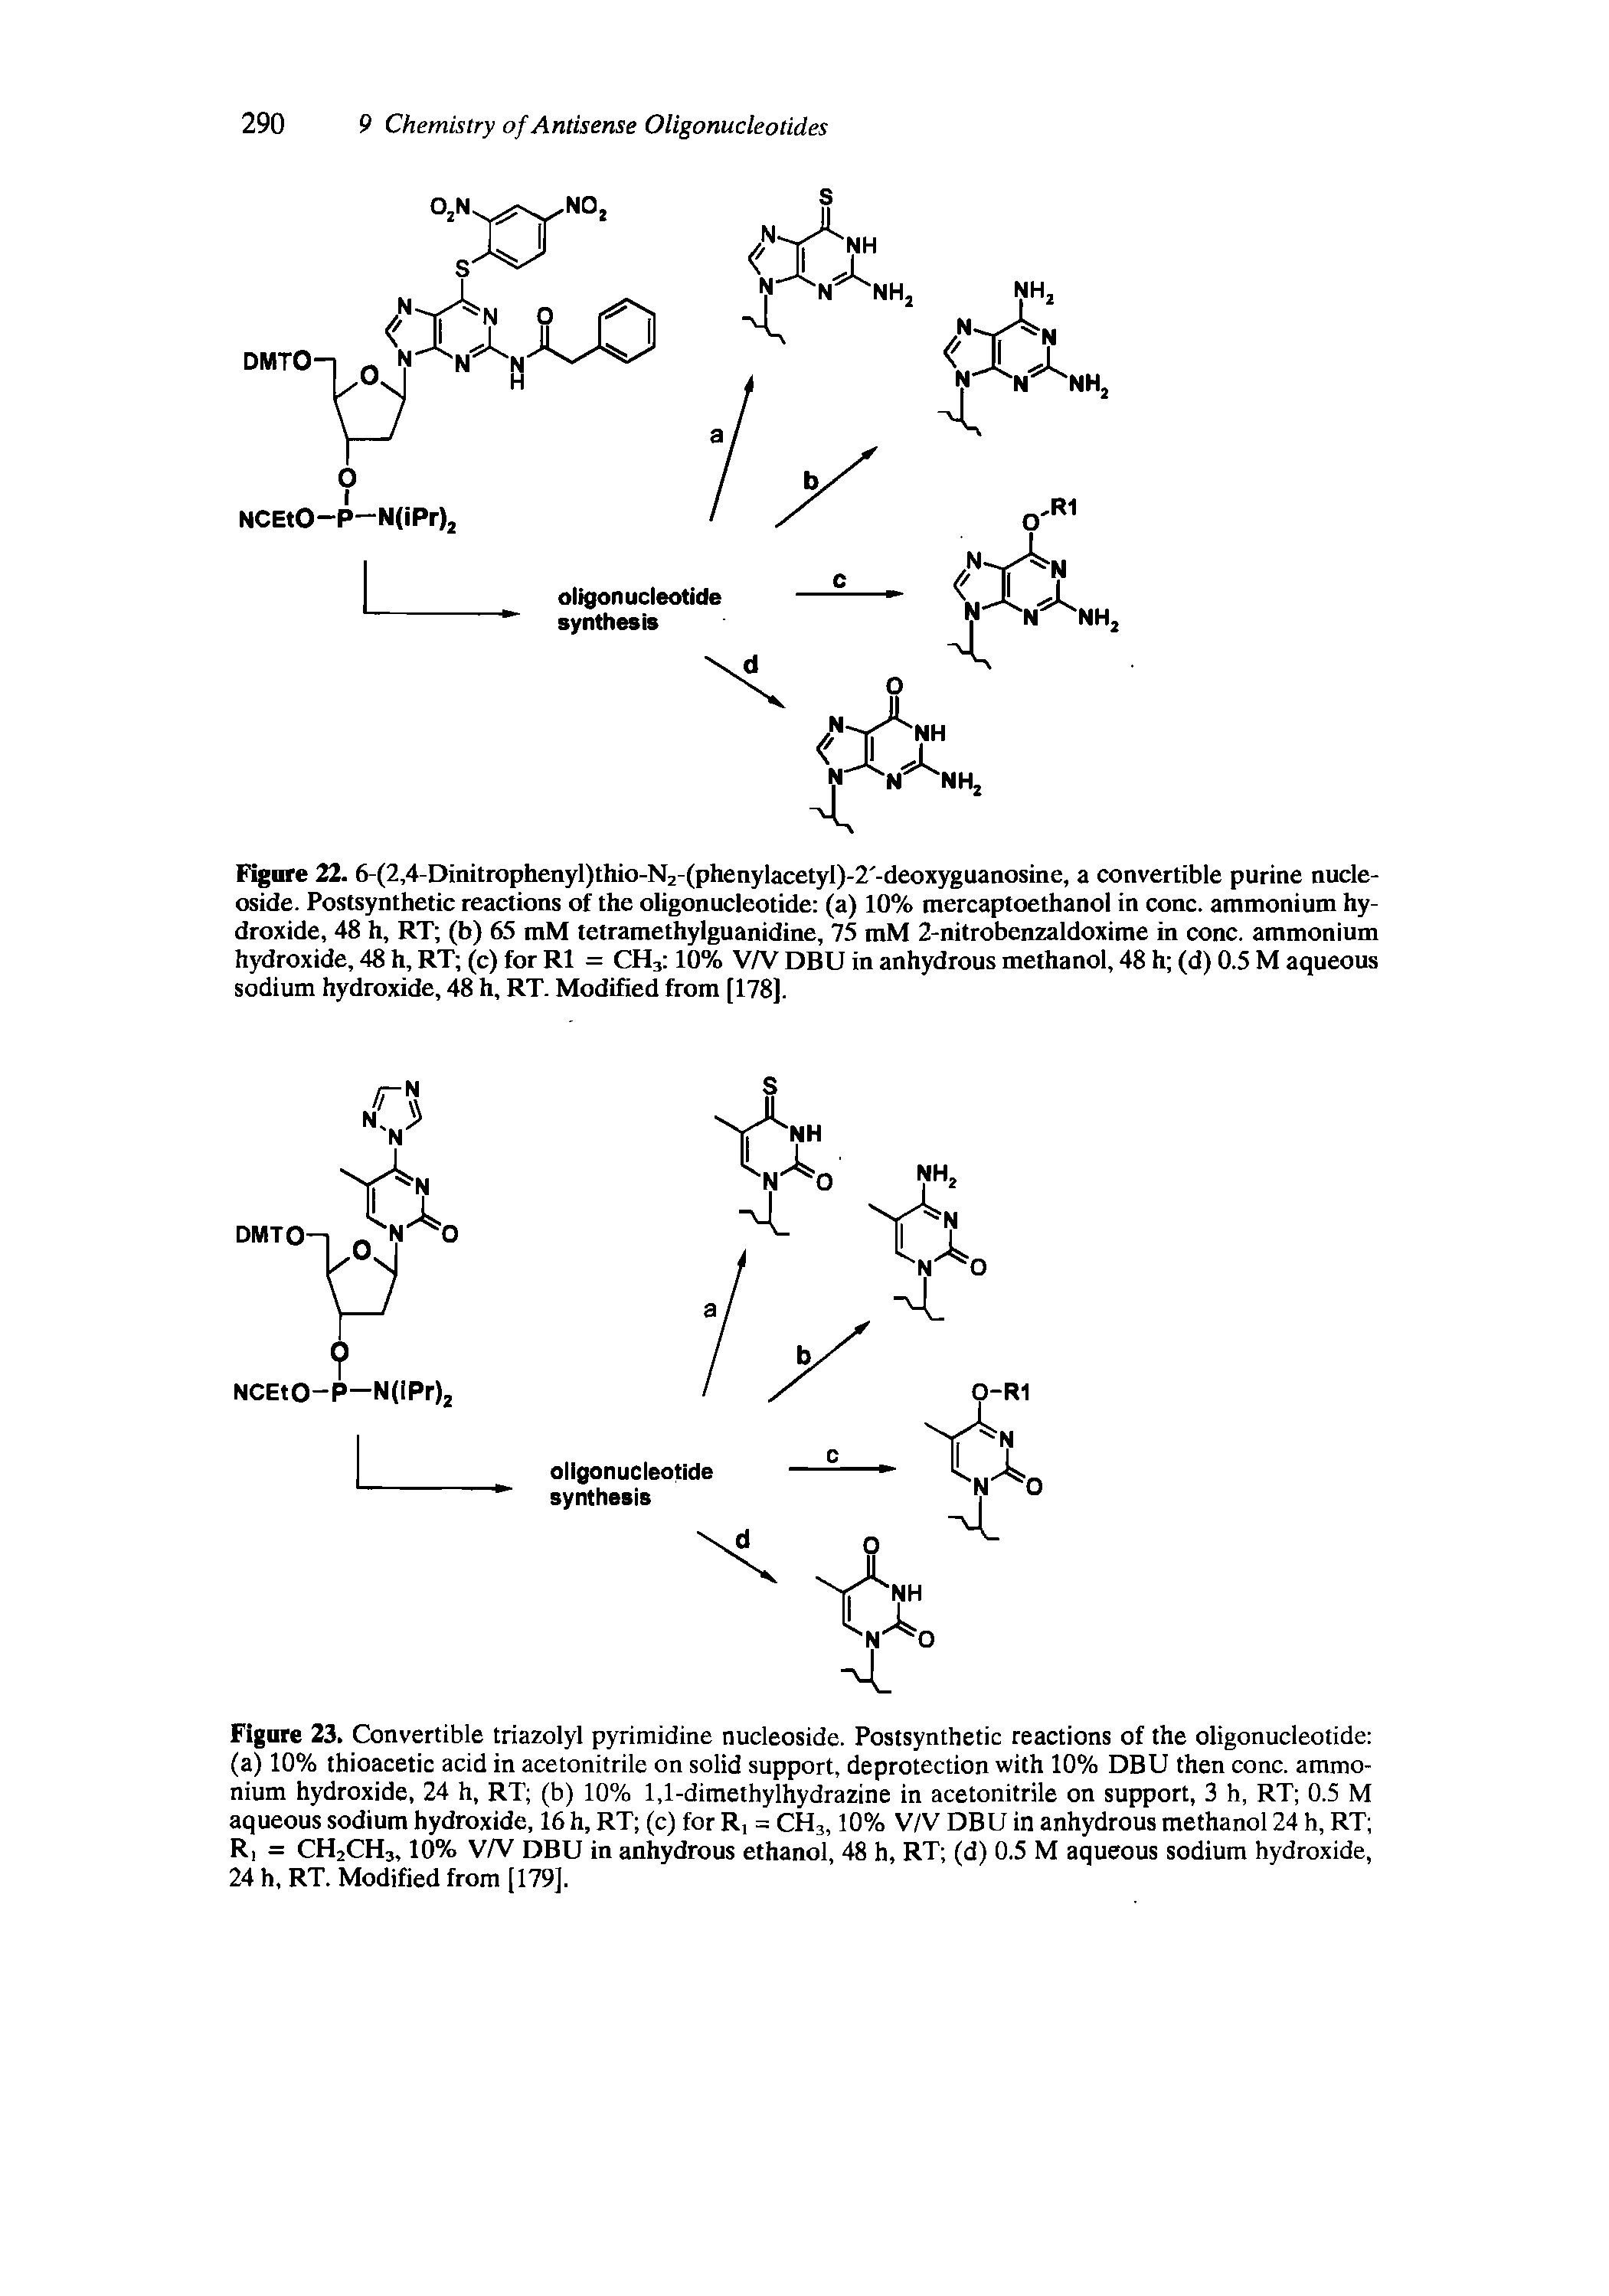 Figure 23. Convertible triazolyl pyrimidine nucleoside. Postsynthetic reactions of the oligonucleotide (a) 10% thioacetic acid in acetonitrile on solid support, deprotection with 10% DBU then cone, ammonium hydroxide, 24 h, RT (b) 10% 1,1-dimethylhydrazine in acetonitrile on support, 3 h, RT 0.5 M aqueous sodium hydroxide, 16 h, RT (c) for R, = CH3,10% V/V DBU in anhydrous methanol 24 h, RT Ri = CH2CH3,10% V/V DBU in anhydrous ethanol, 48 h, RT (d) 0.5 M aqueous sodium hydroxide, 24 h, RT. Modified from [179],...